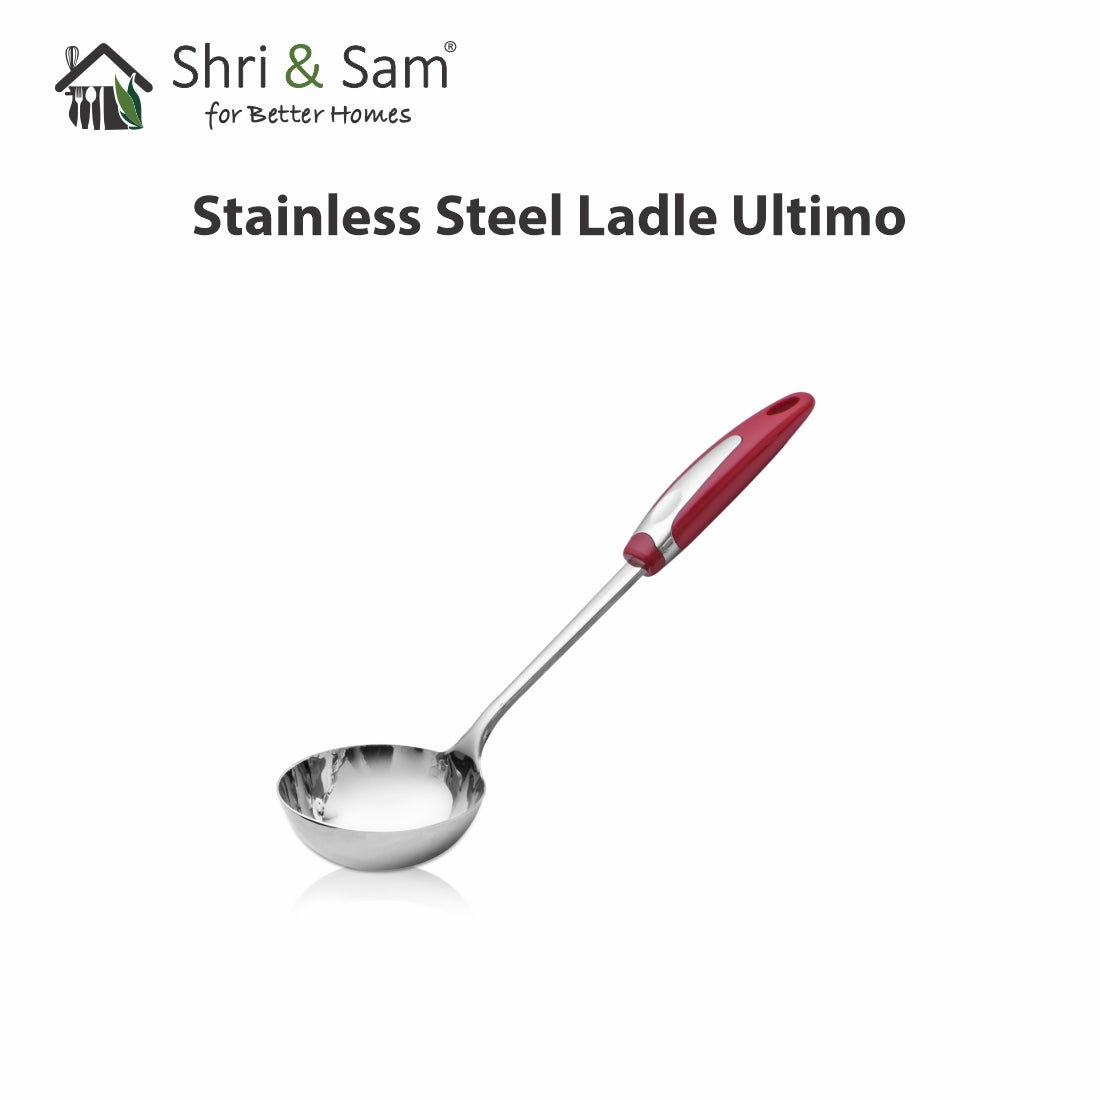 Stainless Steel Ladle Ultimo